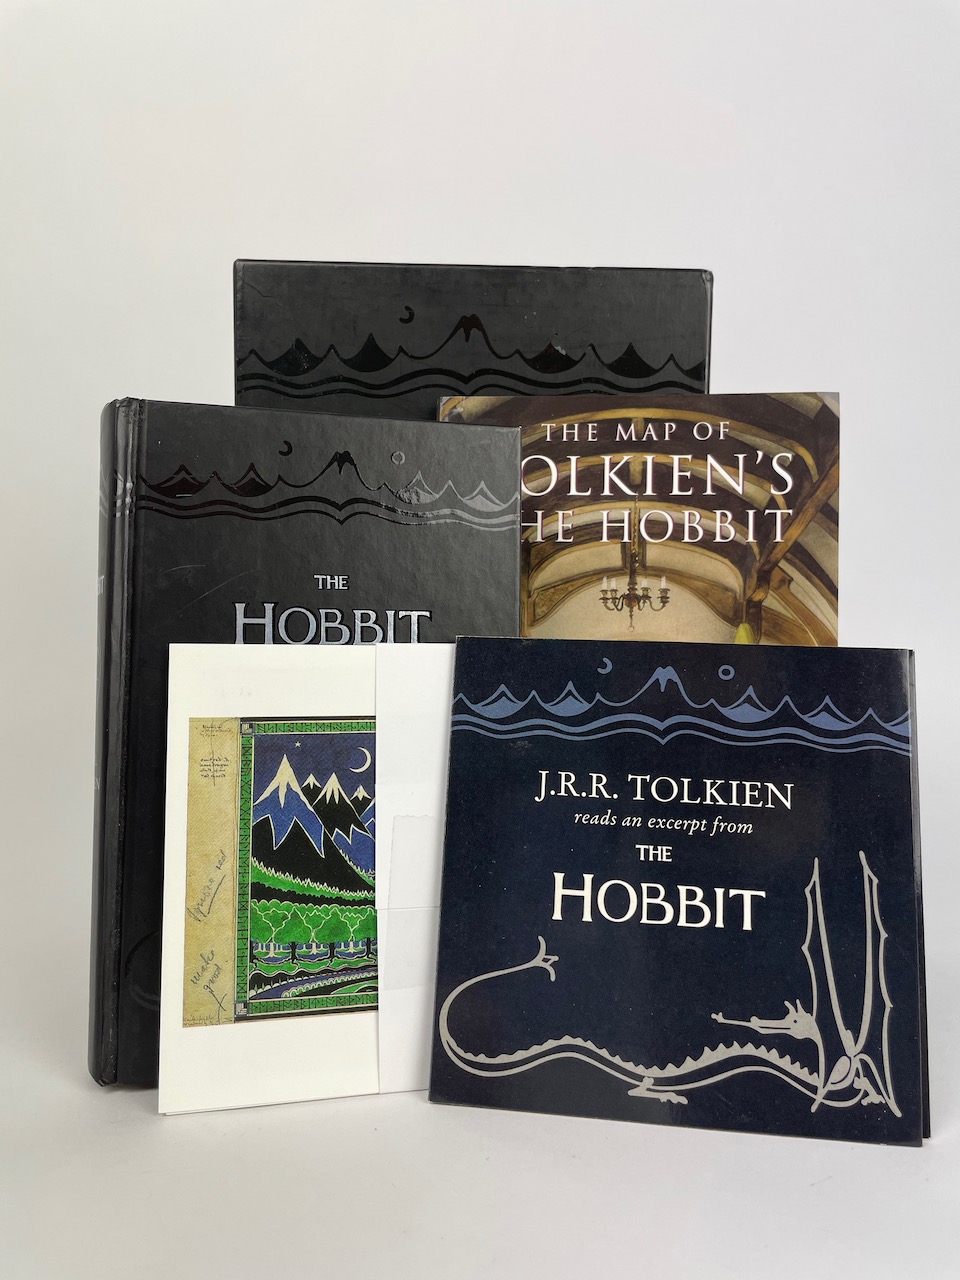 
The Hobbit, Limited Edition Collectors' Box 8